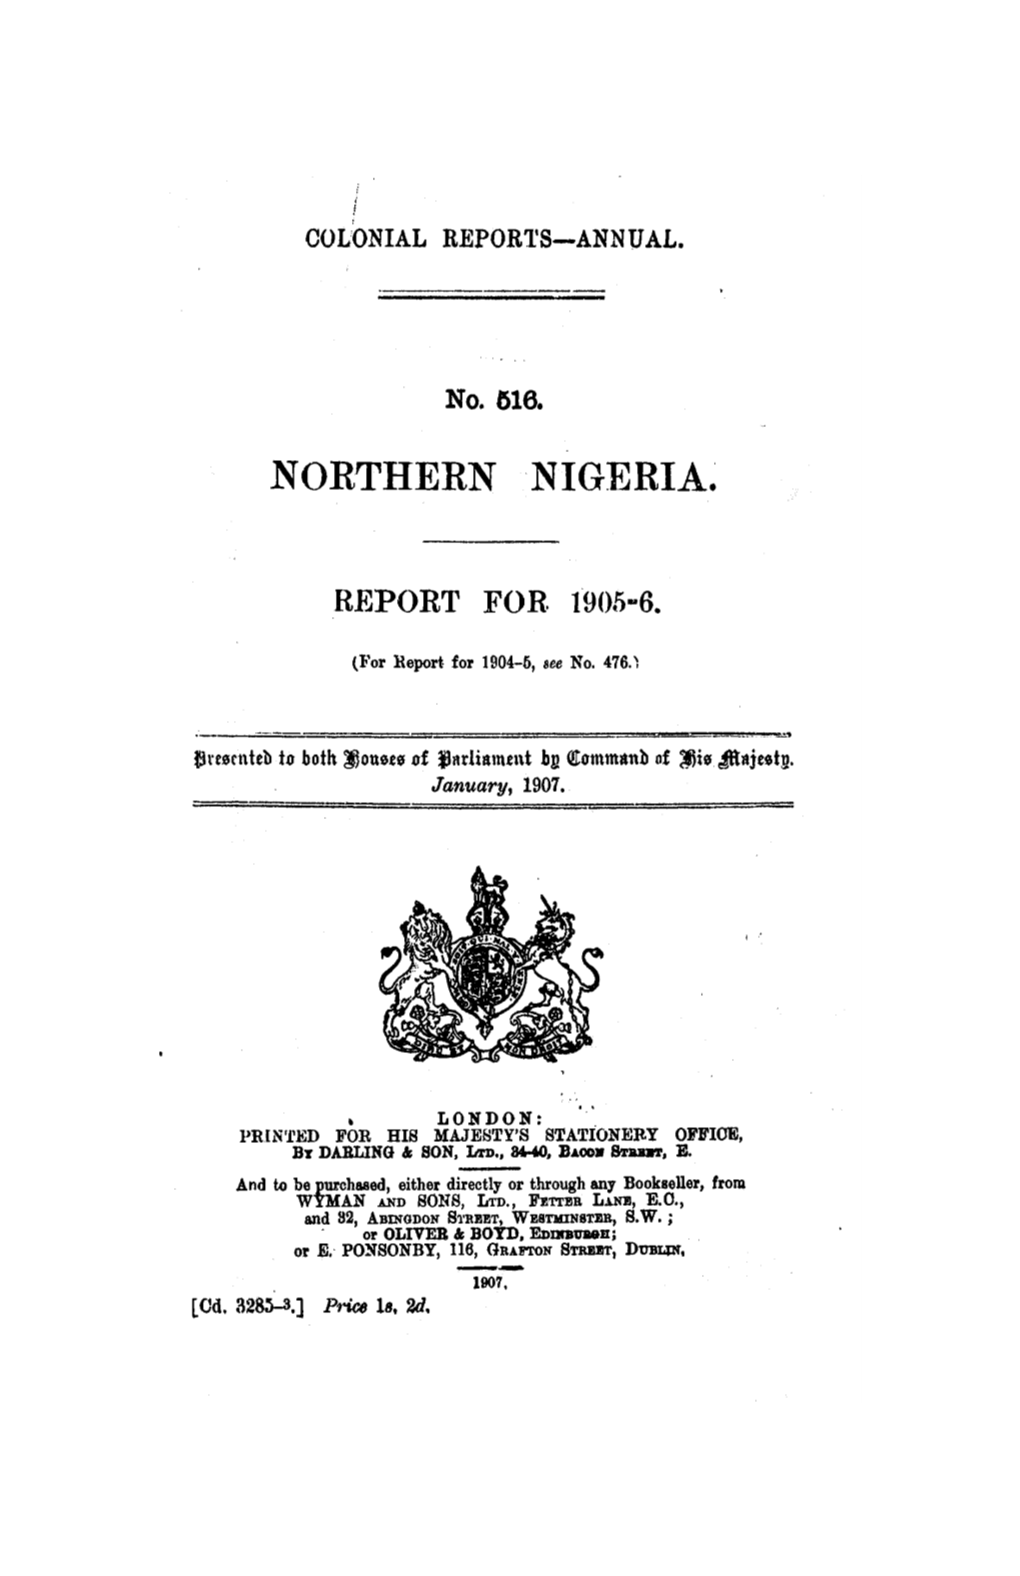 Annual Report of the Colonies, Northern Nigeria, 1905-06